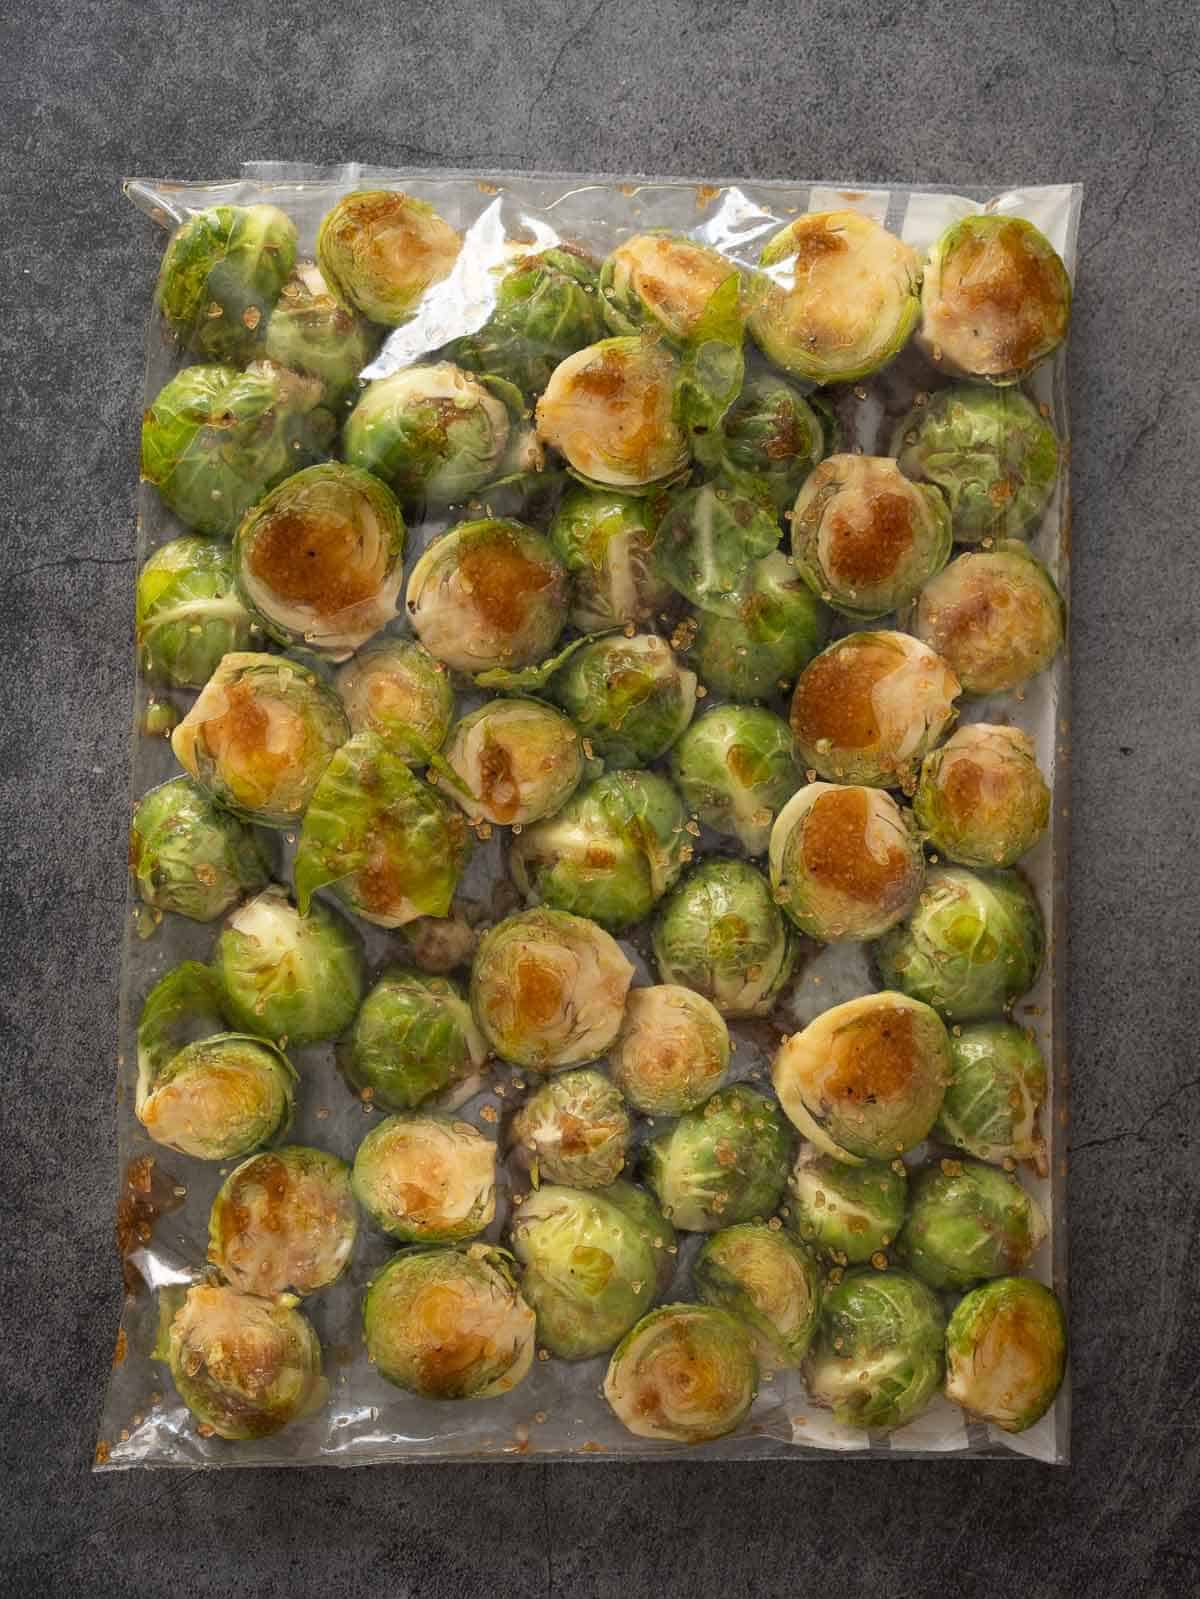 let the Brussels sprouts marinate overnight.